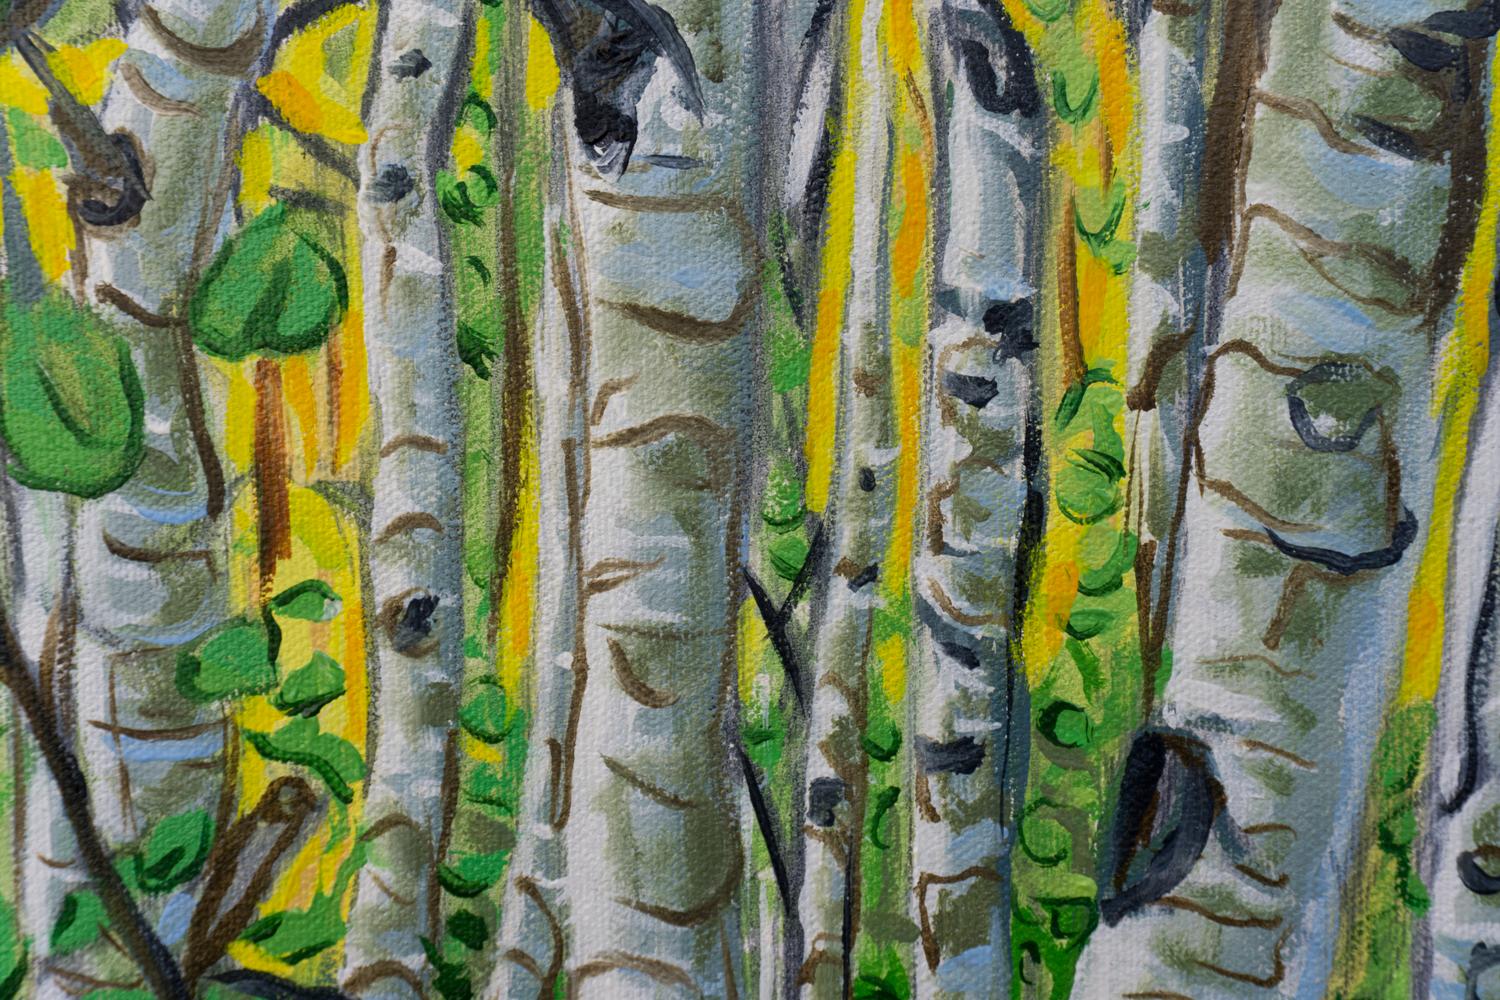 <p>Artist Comments<br>On a solo hike, I passed through some beautiful aspen groves. It was early morning and the sunlight was filtering in behind. I noticed a lone, small pine growing up through the grove. I felt a bit of a kinship with this